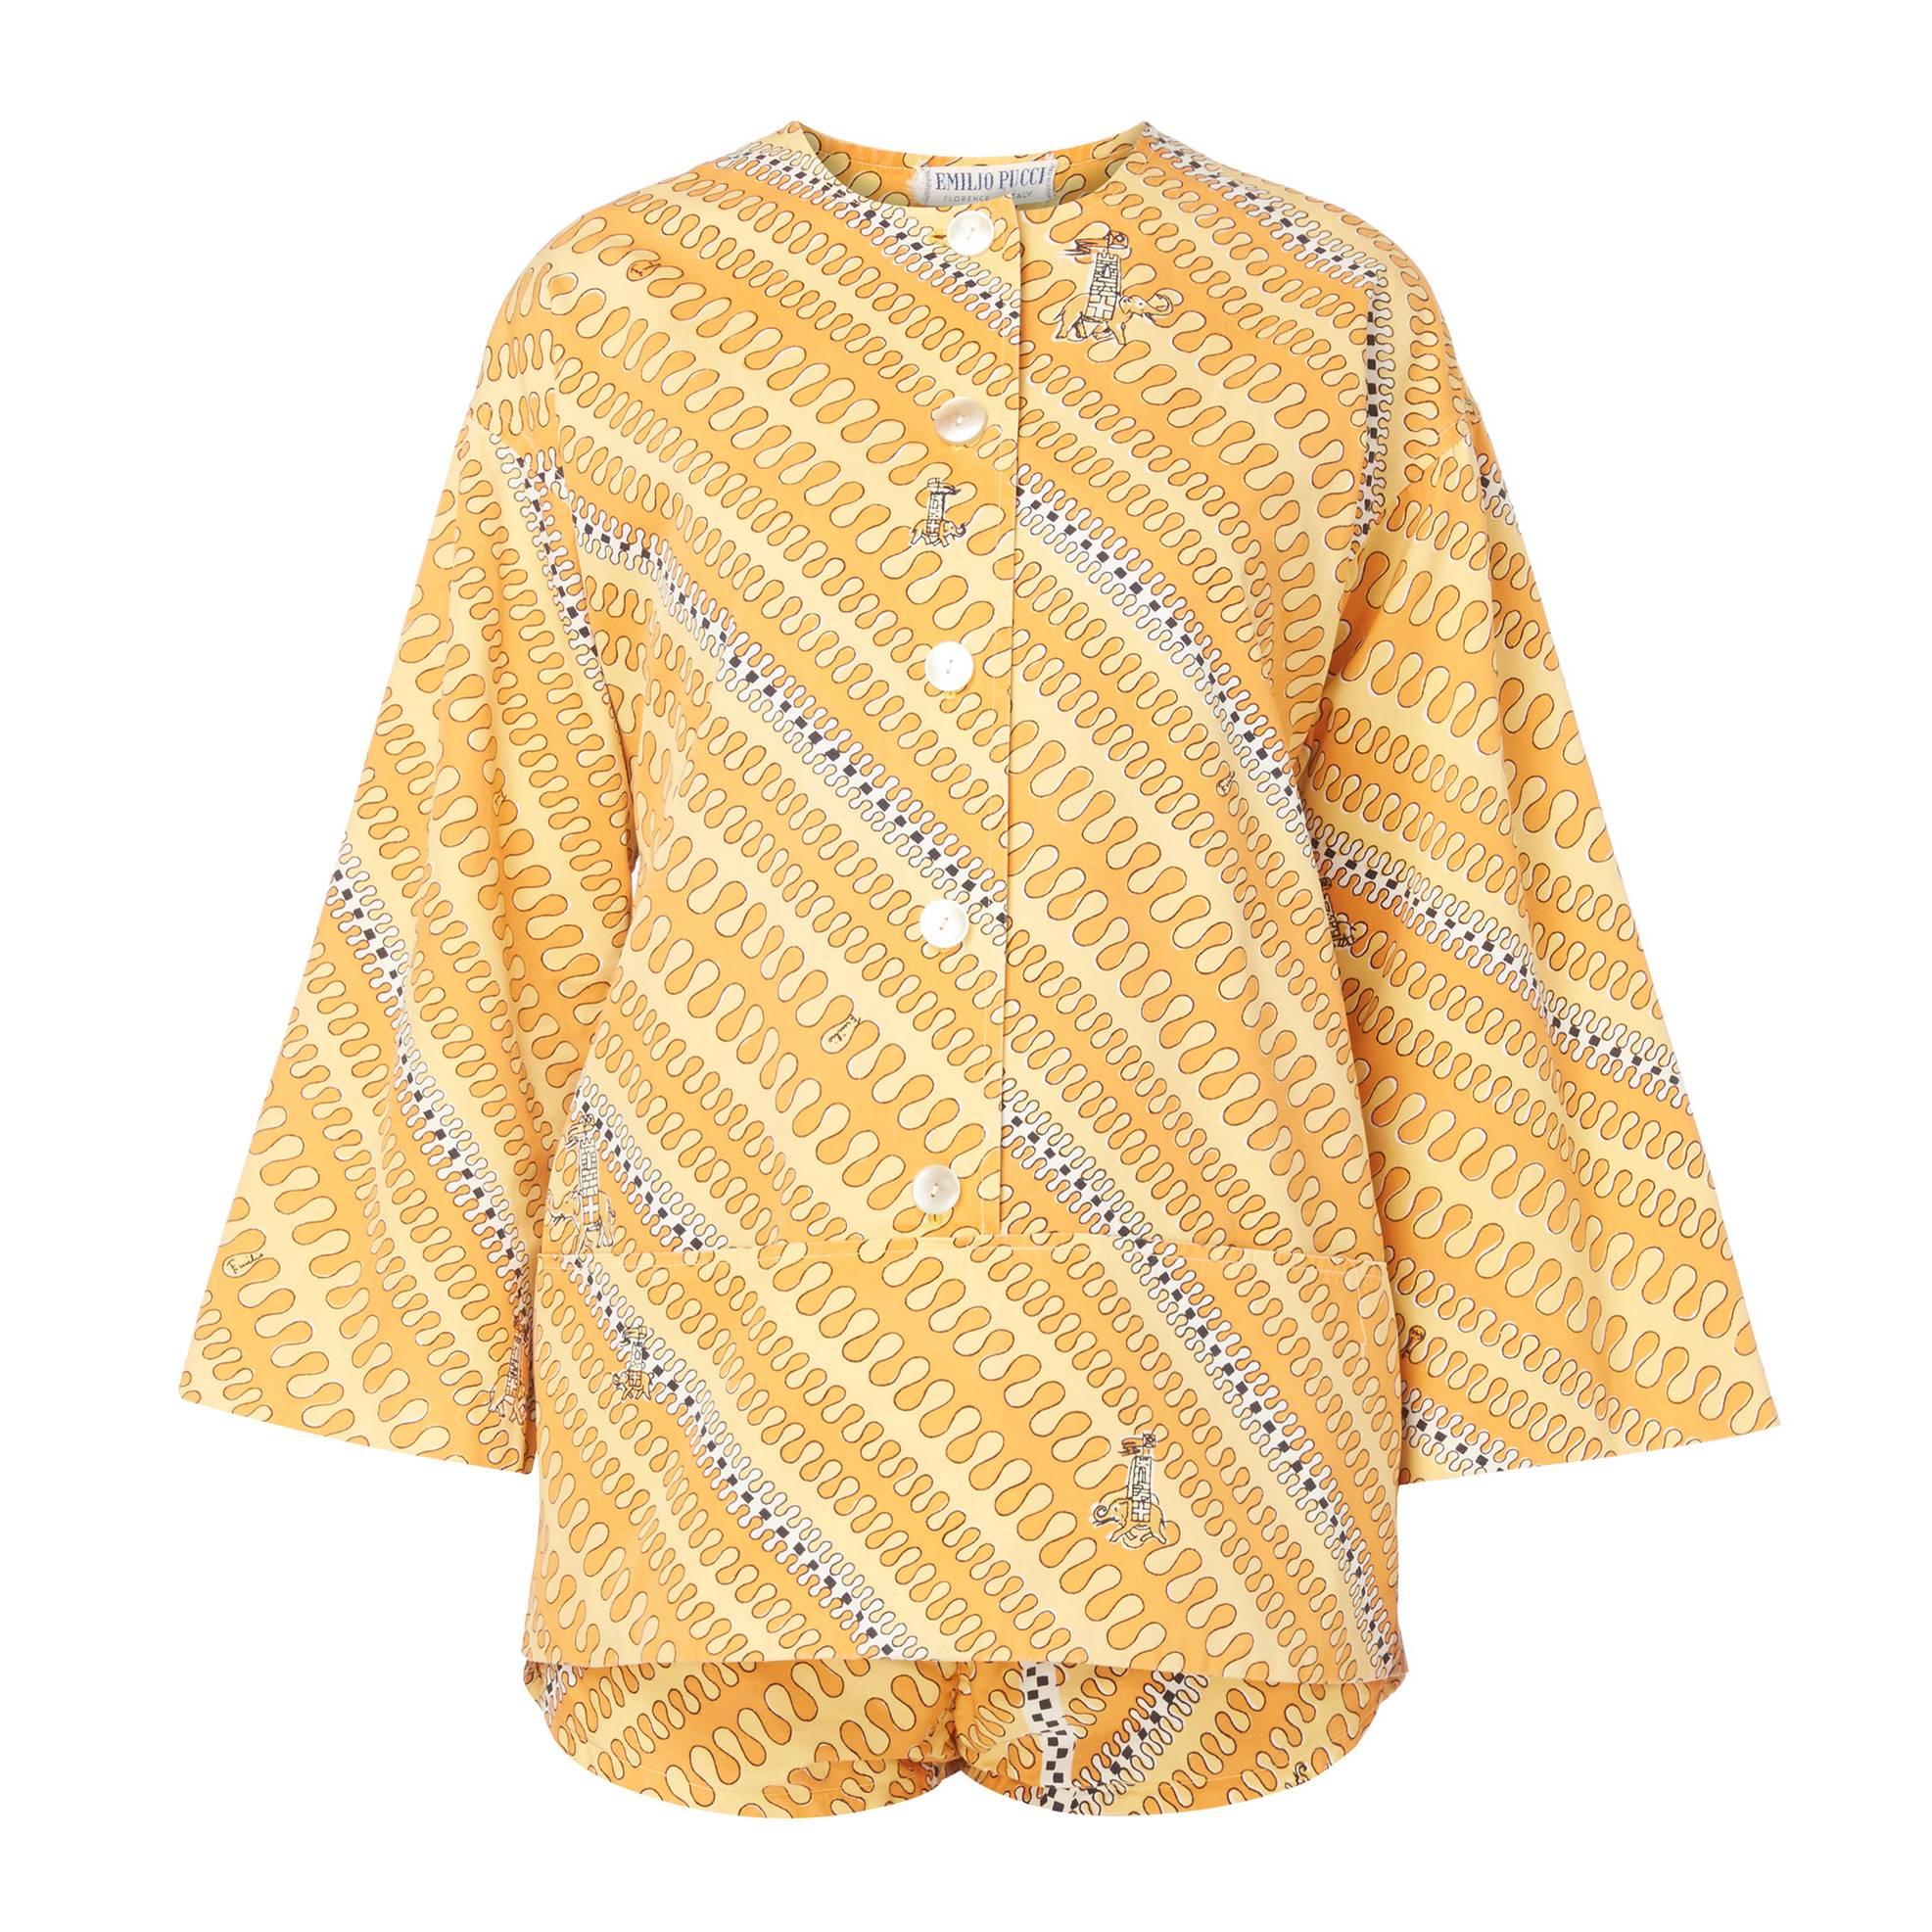 Pucci yellow & orange printed playsuit, circa 1968 For Sale